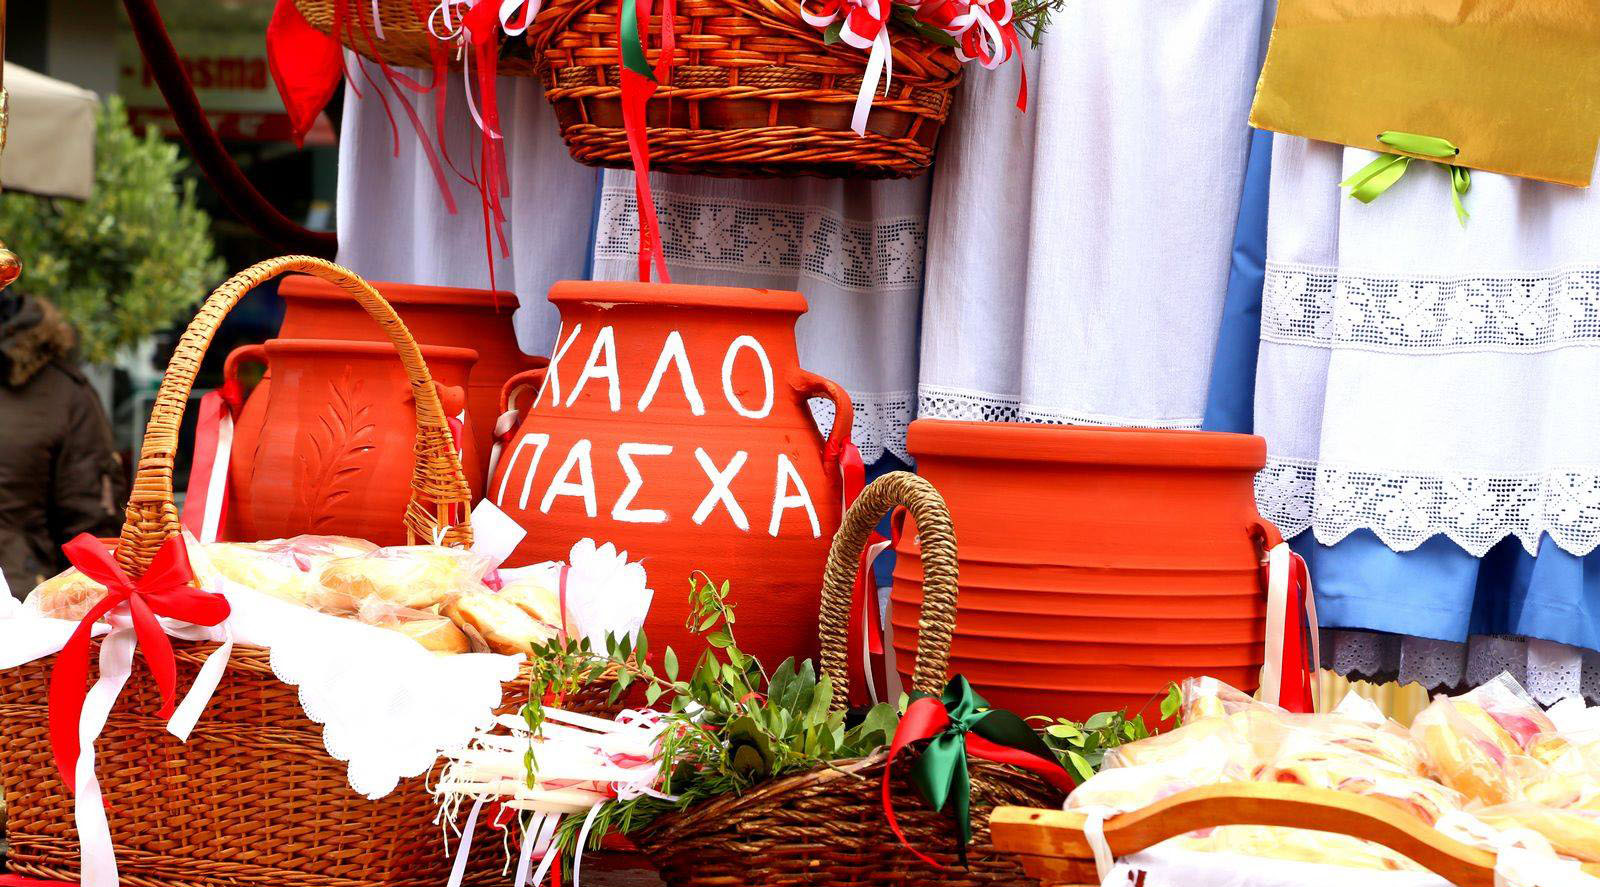 Orthodox Easter: Traditions and customs in Kefalonia